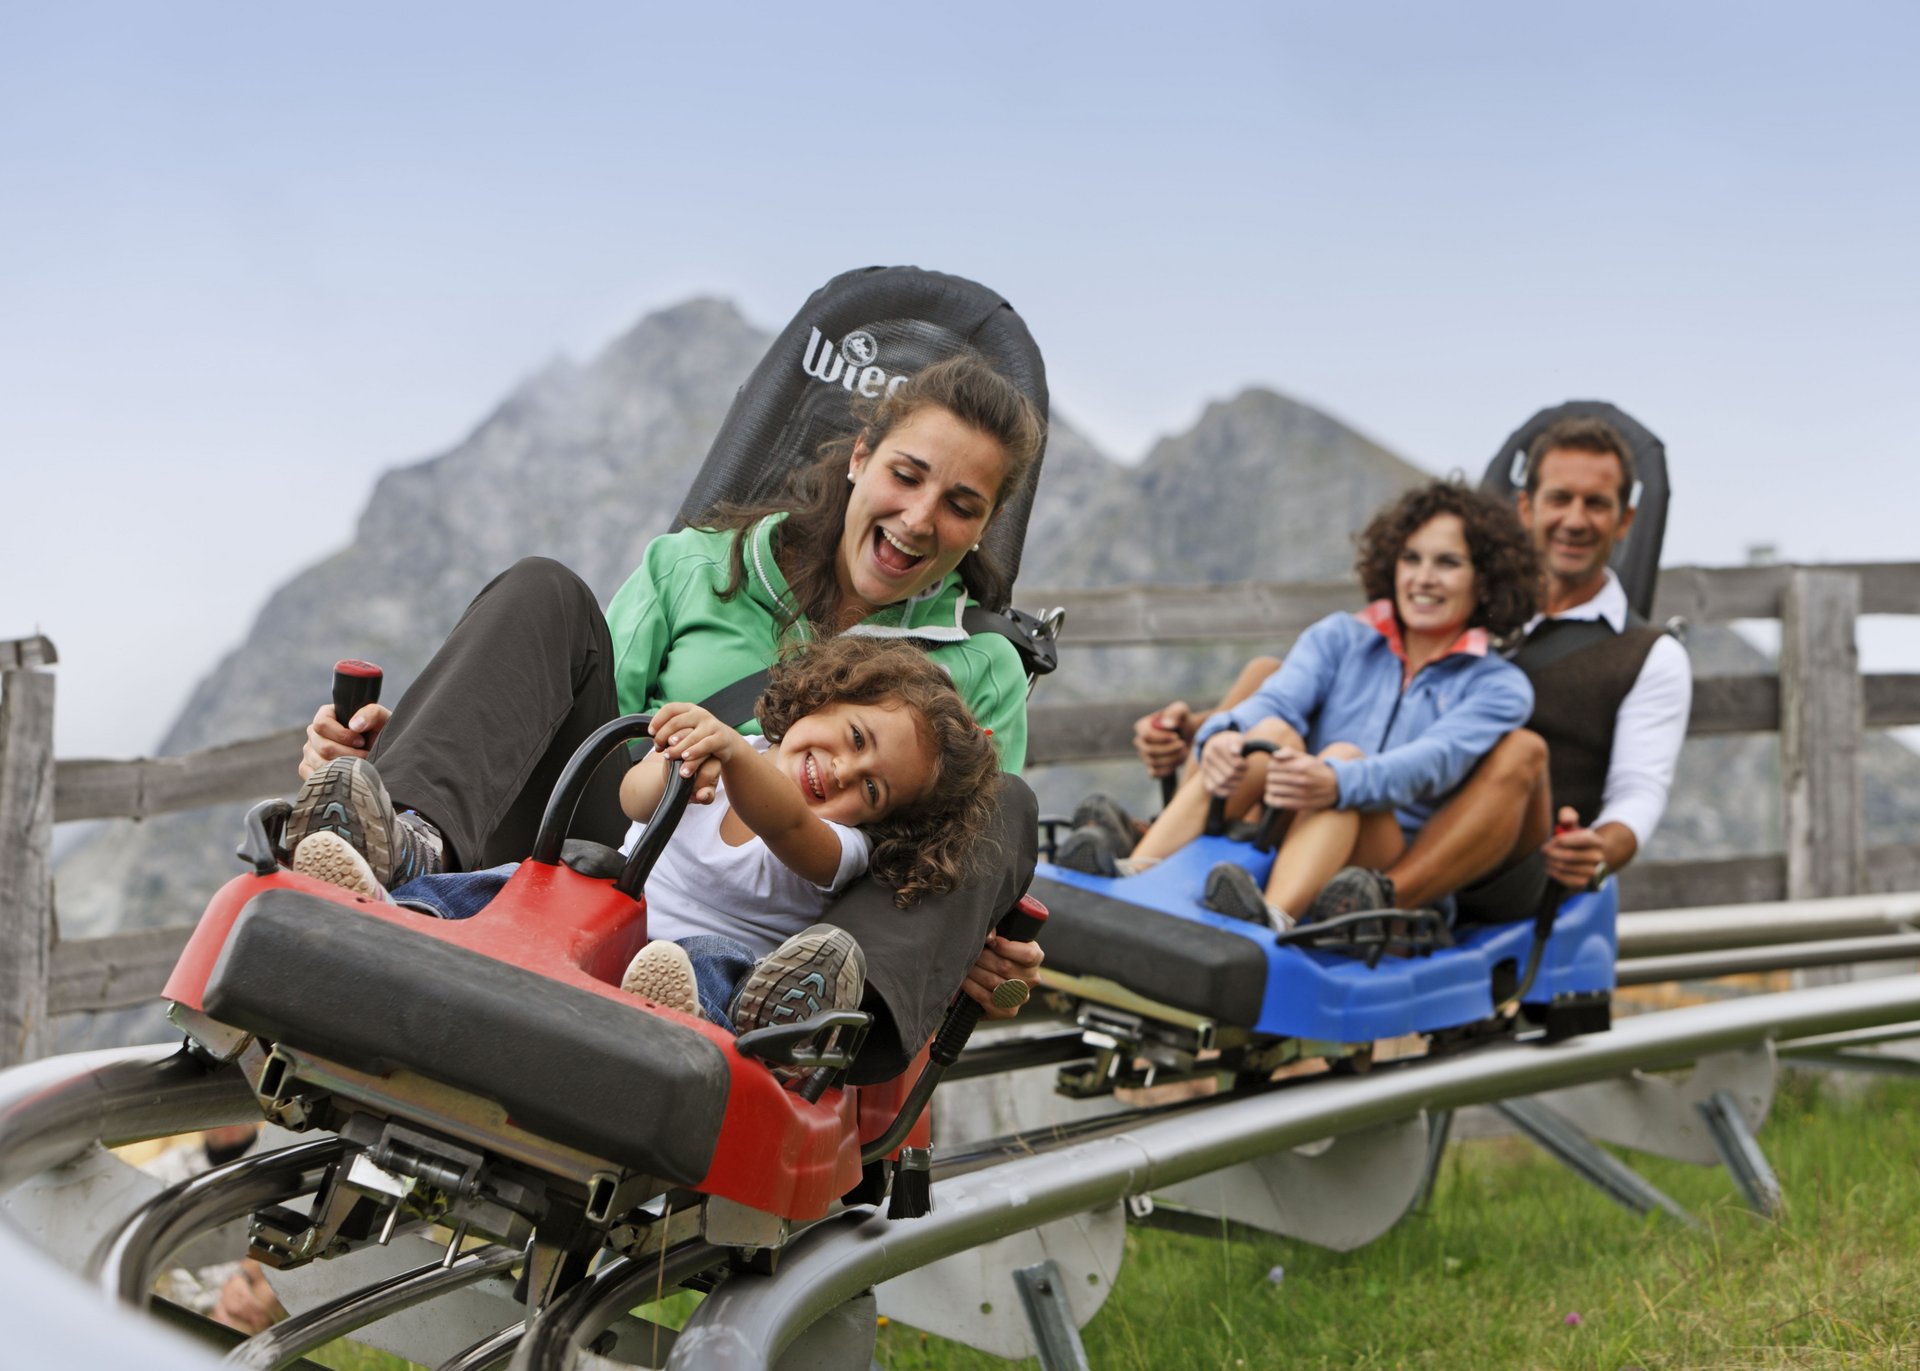 Your active holiday in South Tyrol will be unforgettable!